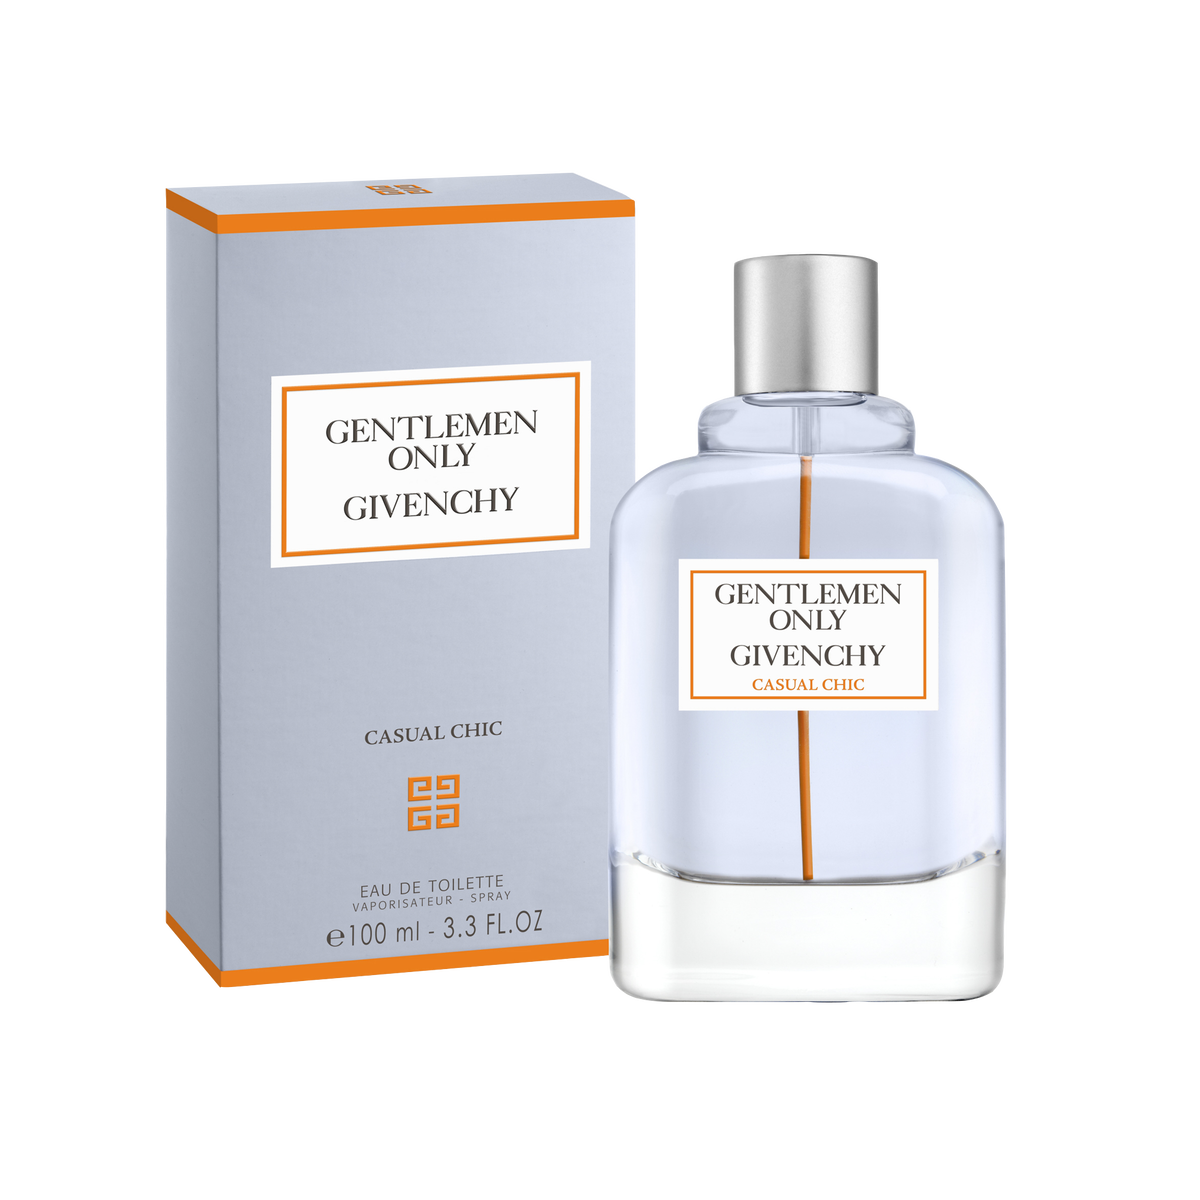 Gentlemen Only Casual Chic by Givenchy 3.3 oz Eau de Toilette Spray